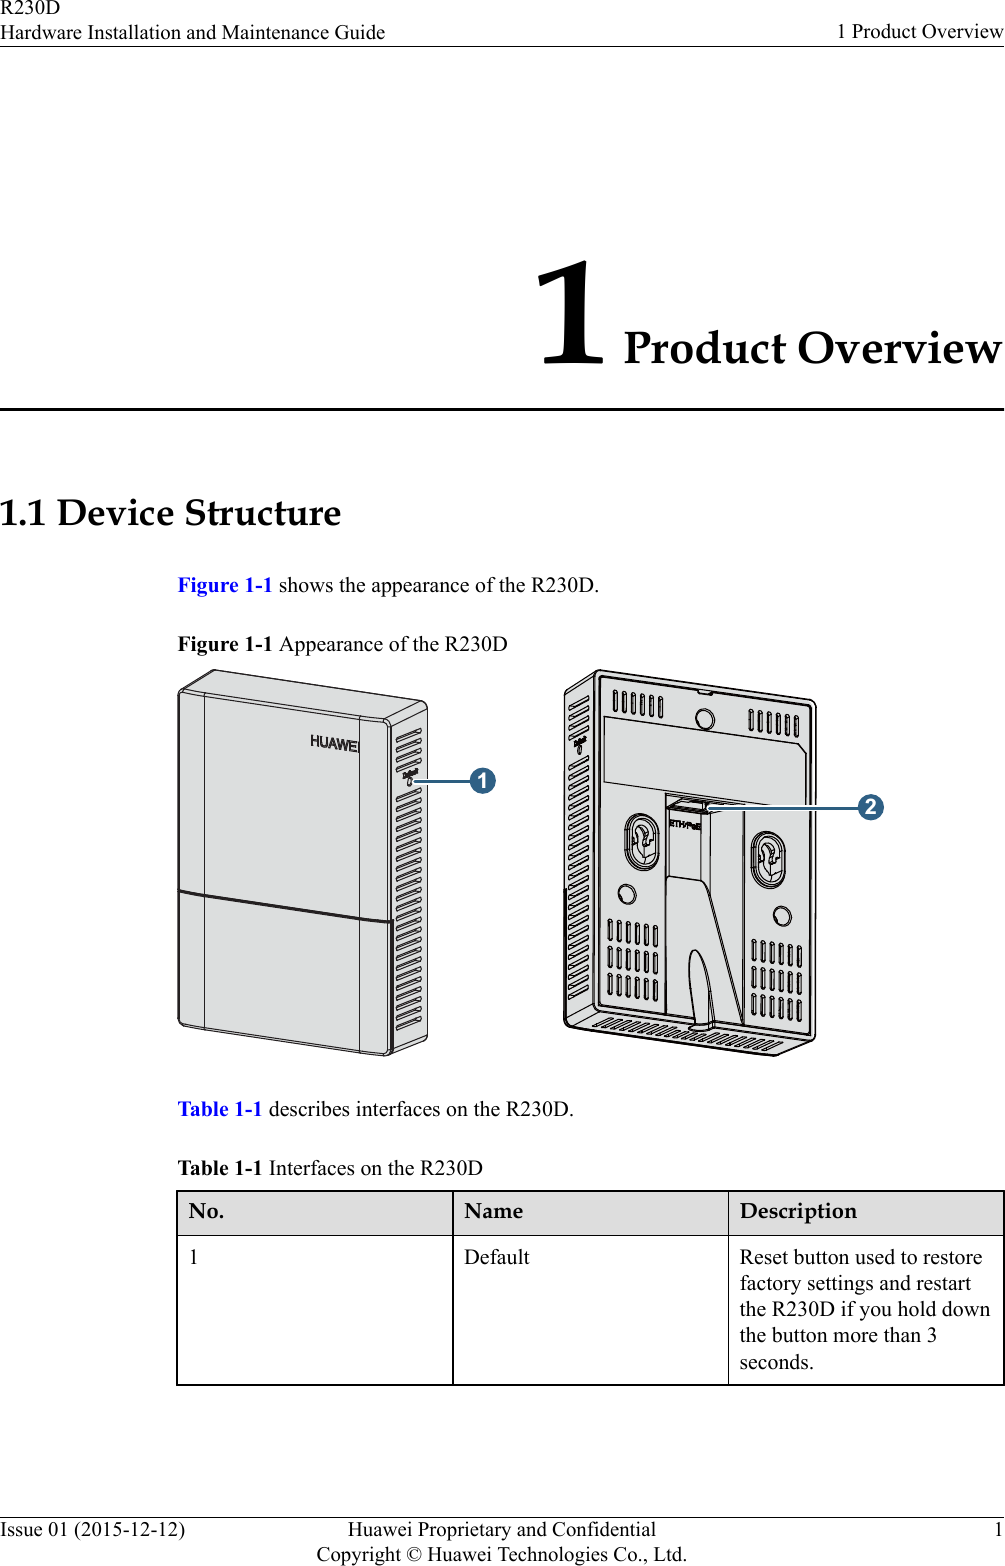 1 Product Overview1.1 Device StructureFigure 1-1 shows the appearance of the R230D.Figure 1-1 Appearance of the R230D12Table 1-1 describes interfaces on the R230D.Table 1-1 Interfaces on the R230DNo. Name Description1 Default Reset button used to restorefactory settings and restartthe R230D if you hold downthe button more than 3seconds.R230DHardware Installation and Maintenance Guide 1 Product OverviewIssue 01 (2015-12-12) Huawei Proprietary and ConfidentialCopyright © Huawei Technologies Co., Ltd.1